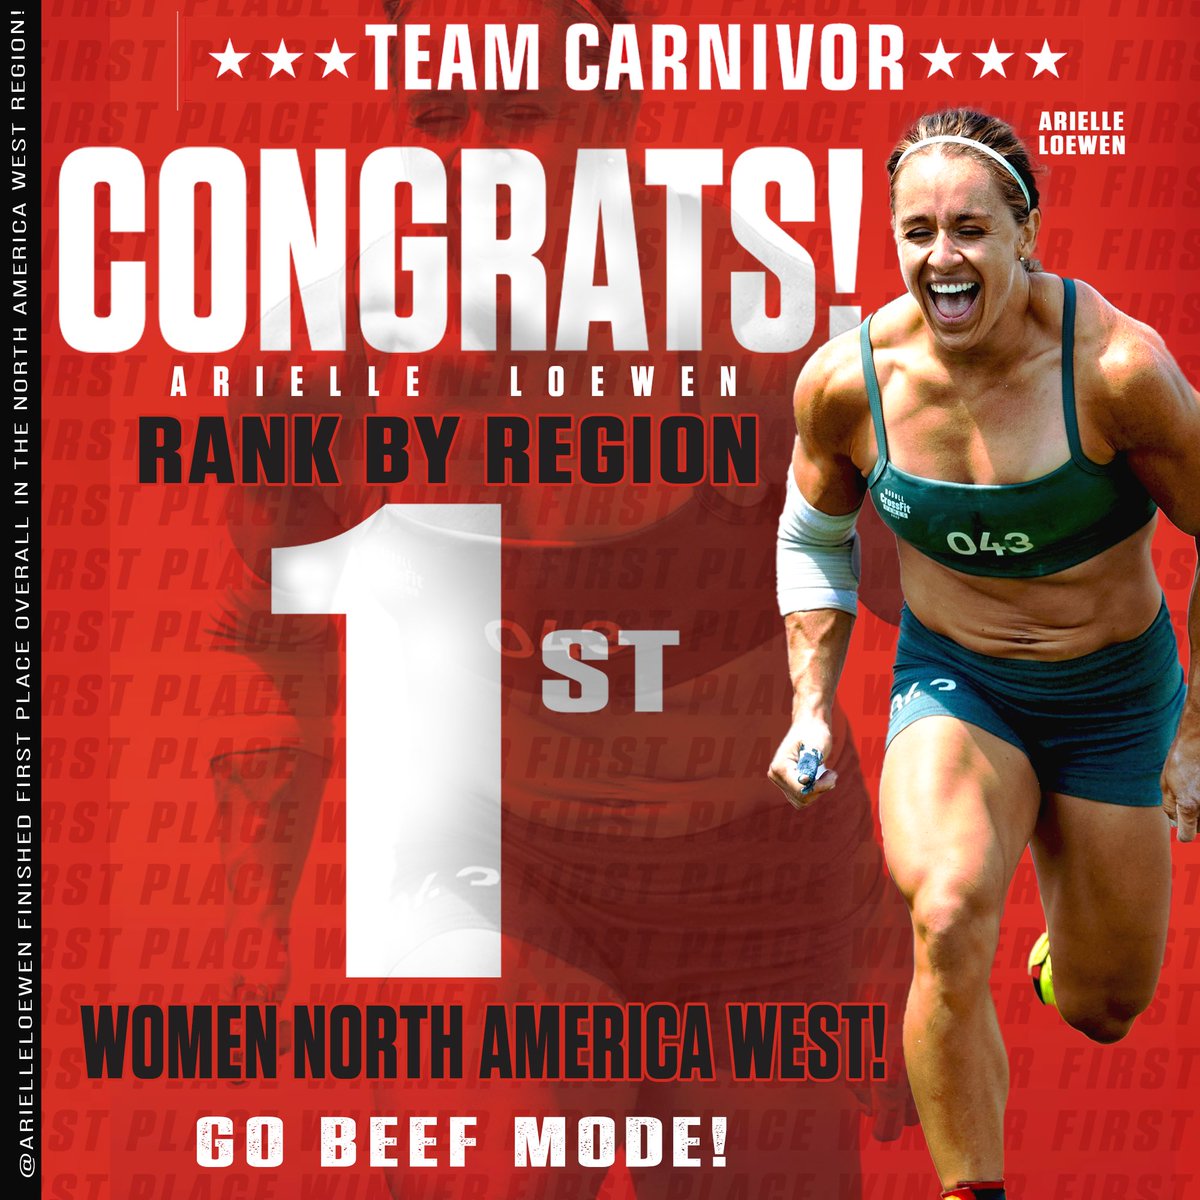 CONGRATS ARIELLE 💥 Team Carnivor Athlete Arielle Loewen stands out once again at the @CrossFitGames open‼️ Arielle Loewen finished 1st place overall in the North America West region! 🏆 Congratulations Arielle we are proud to have you on the team! GO BEEF MODE 💪🥩